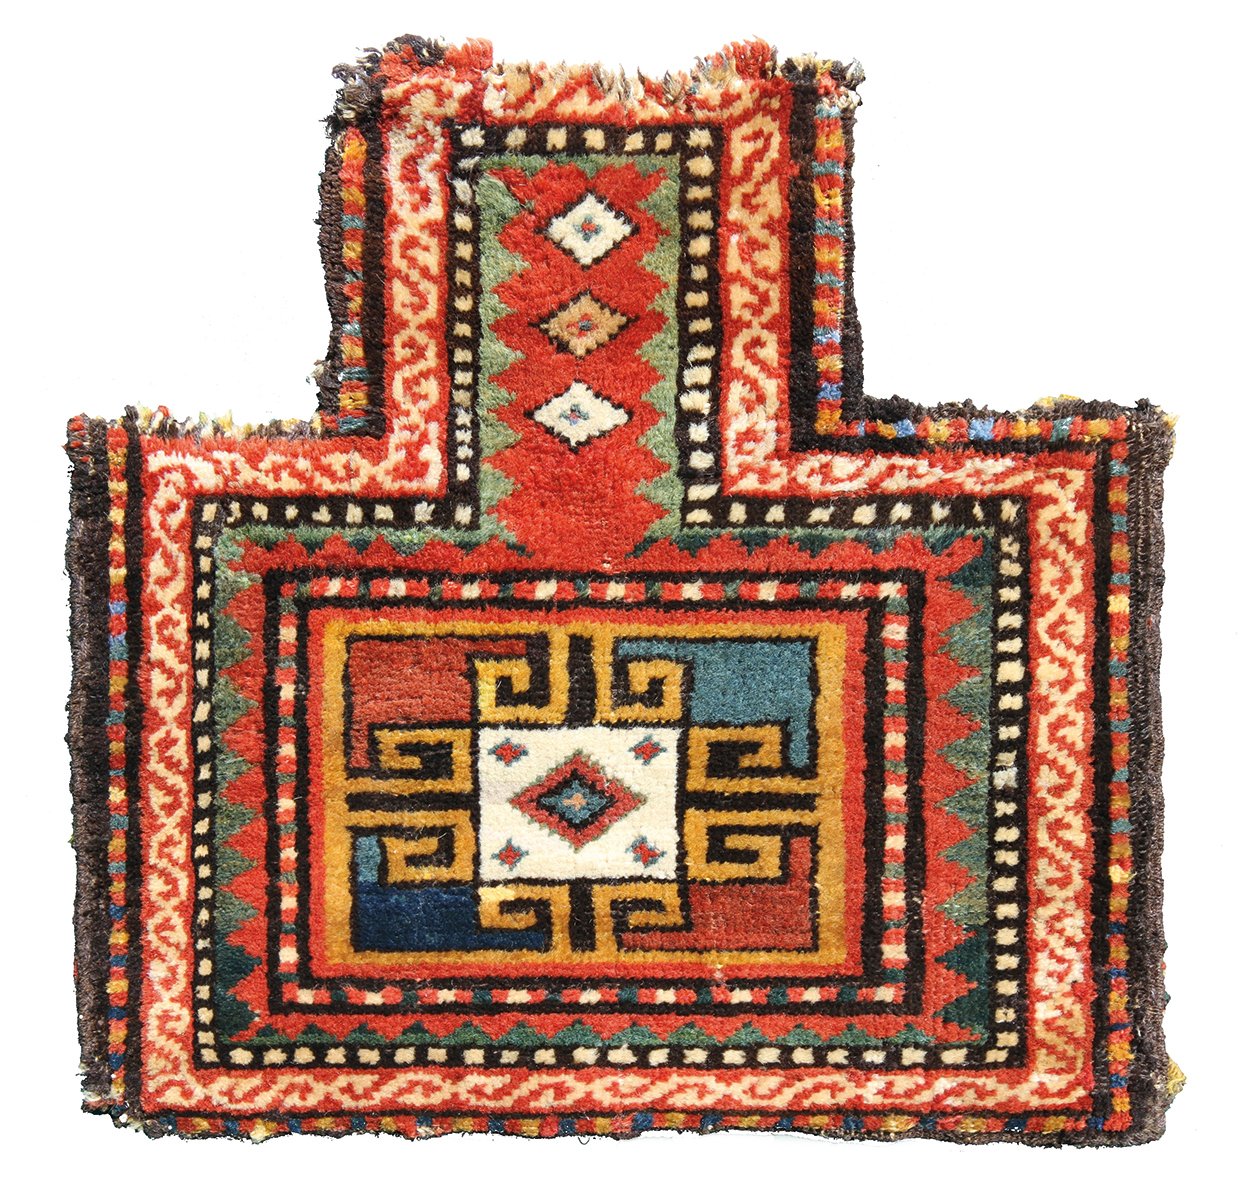 Rust orange weaving with 4 animals, 4 diamond shapes and Nomadic Visions Tribal Weavings in pale beige font on bluey-green rounded edge square